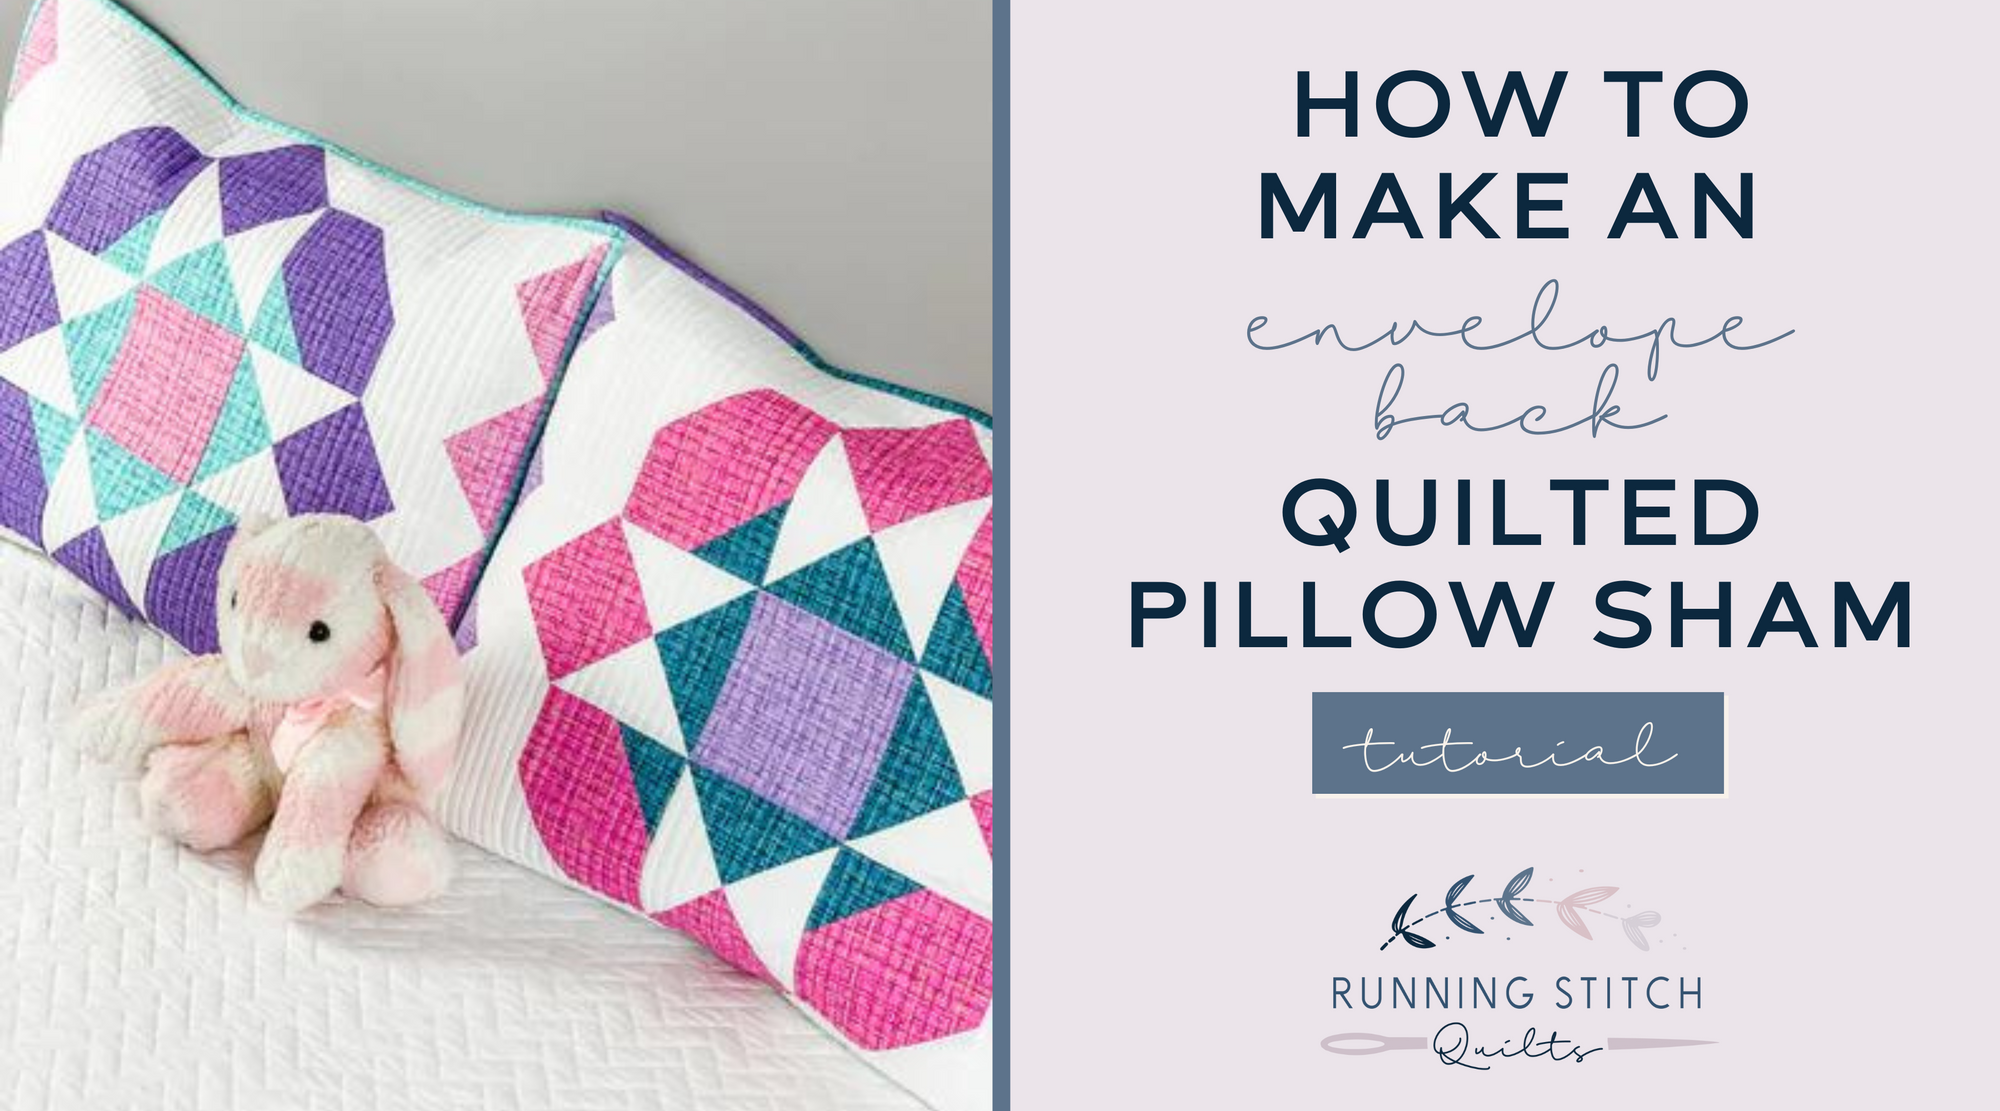 How to Make an Envelope Back Quilted Pillow Sham - Running Stitch Quilts